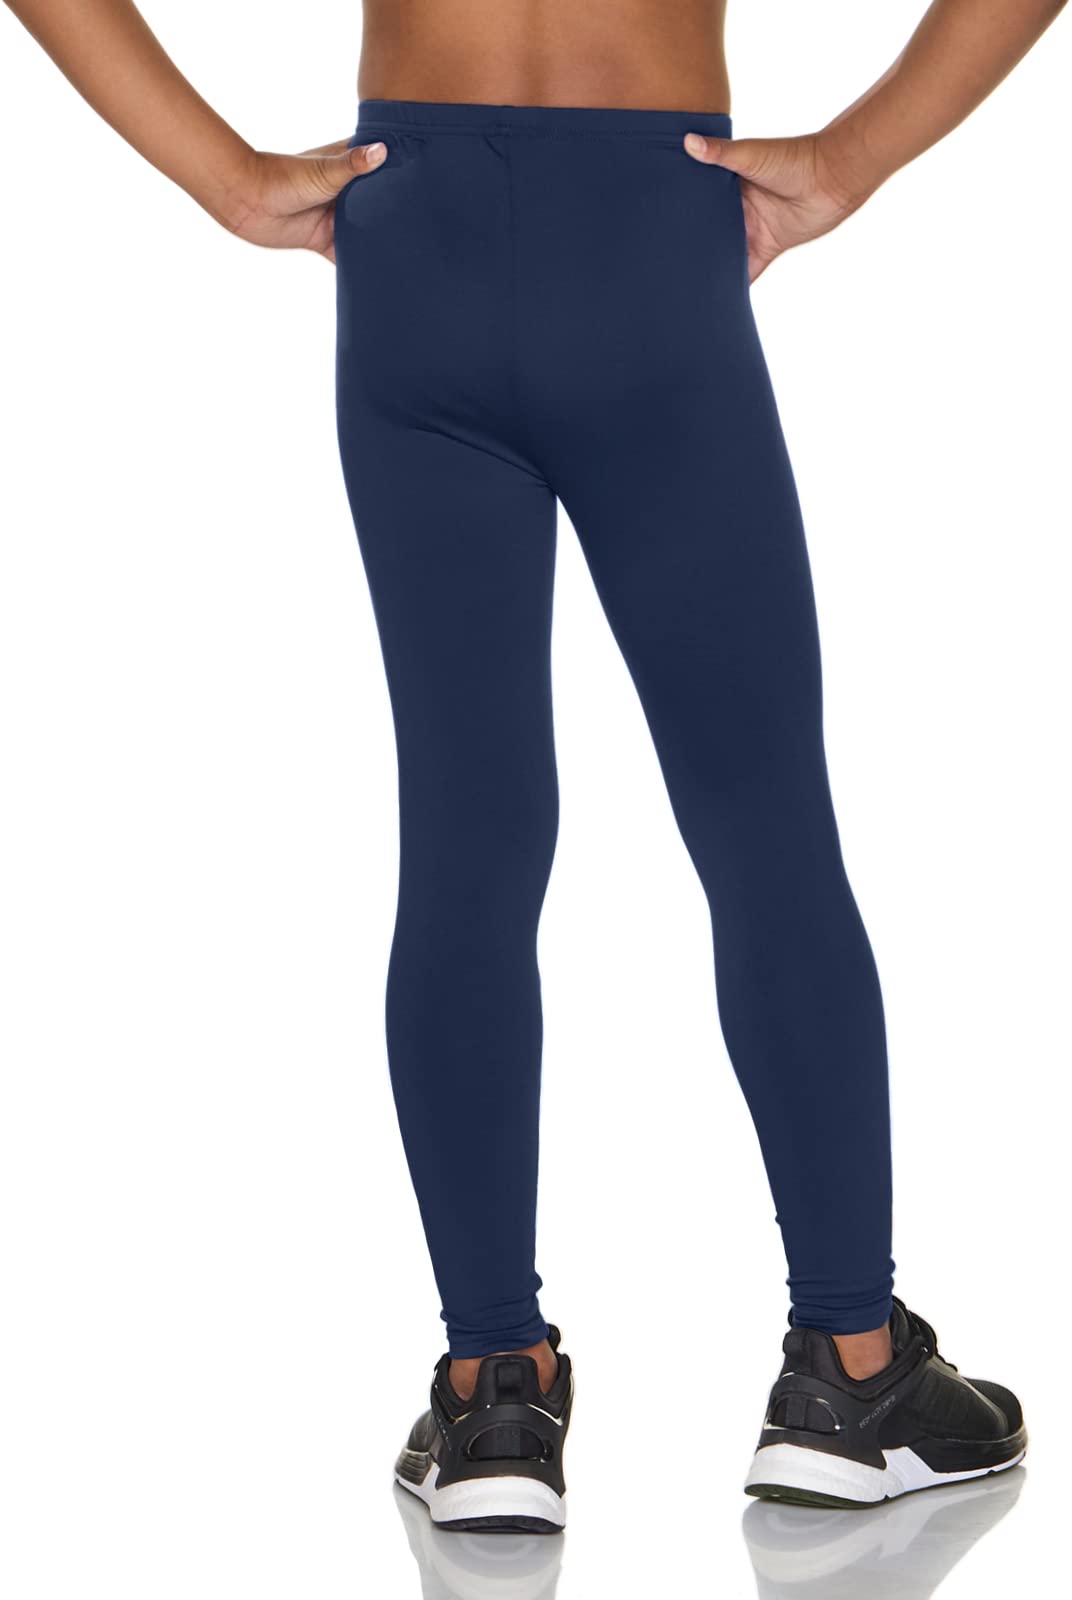 TSLA 1 or 2 Pack Kid's & Boys & Girls Thermal Compression Pants, Athletic Sports Leggings & Running Tights Bottoms